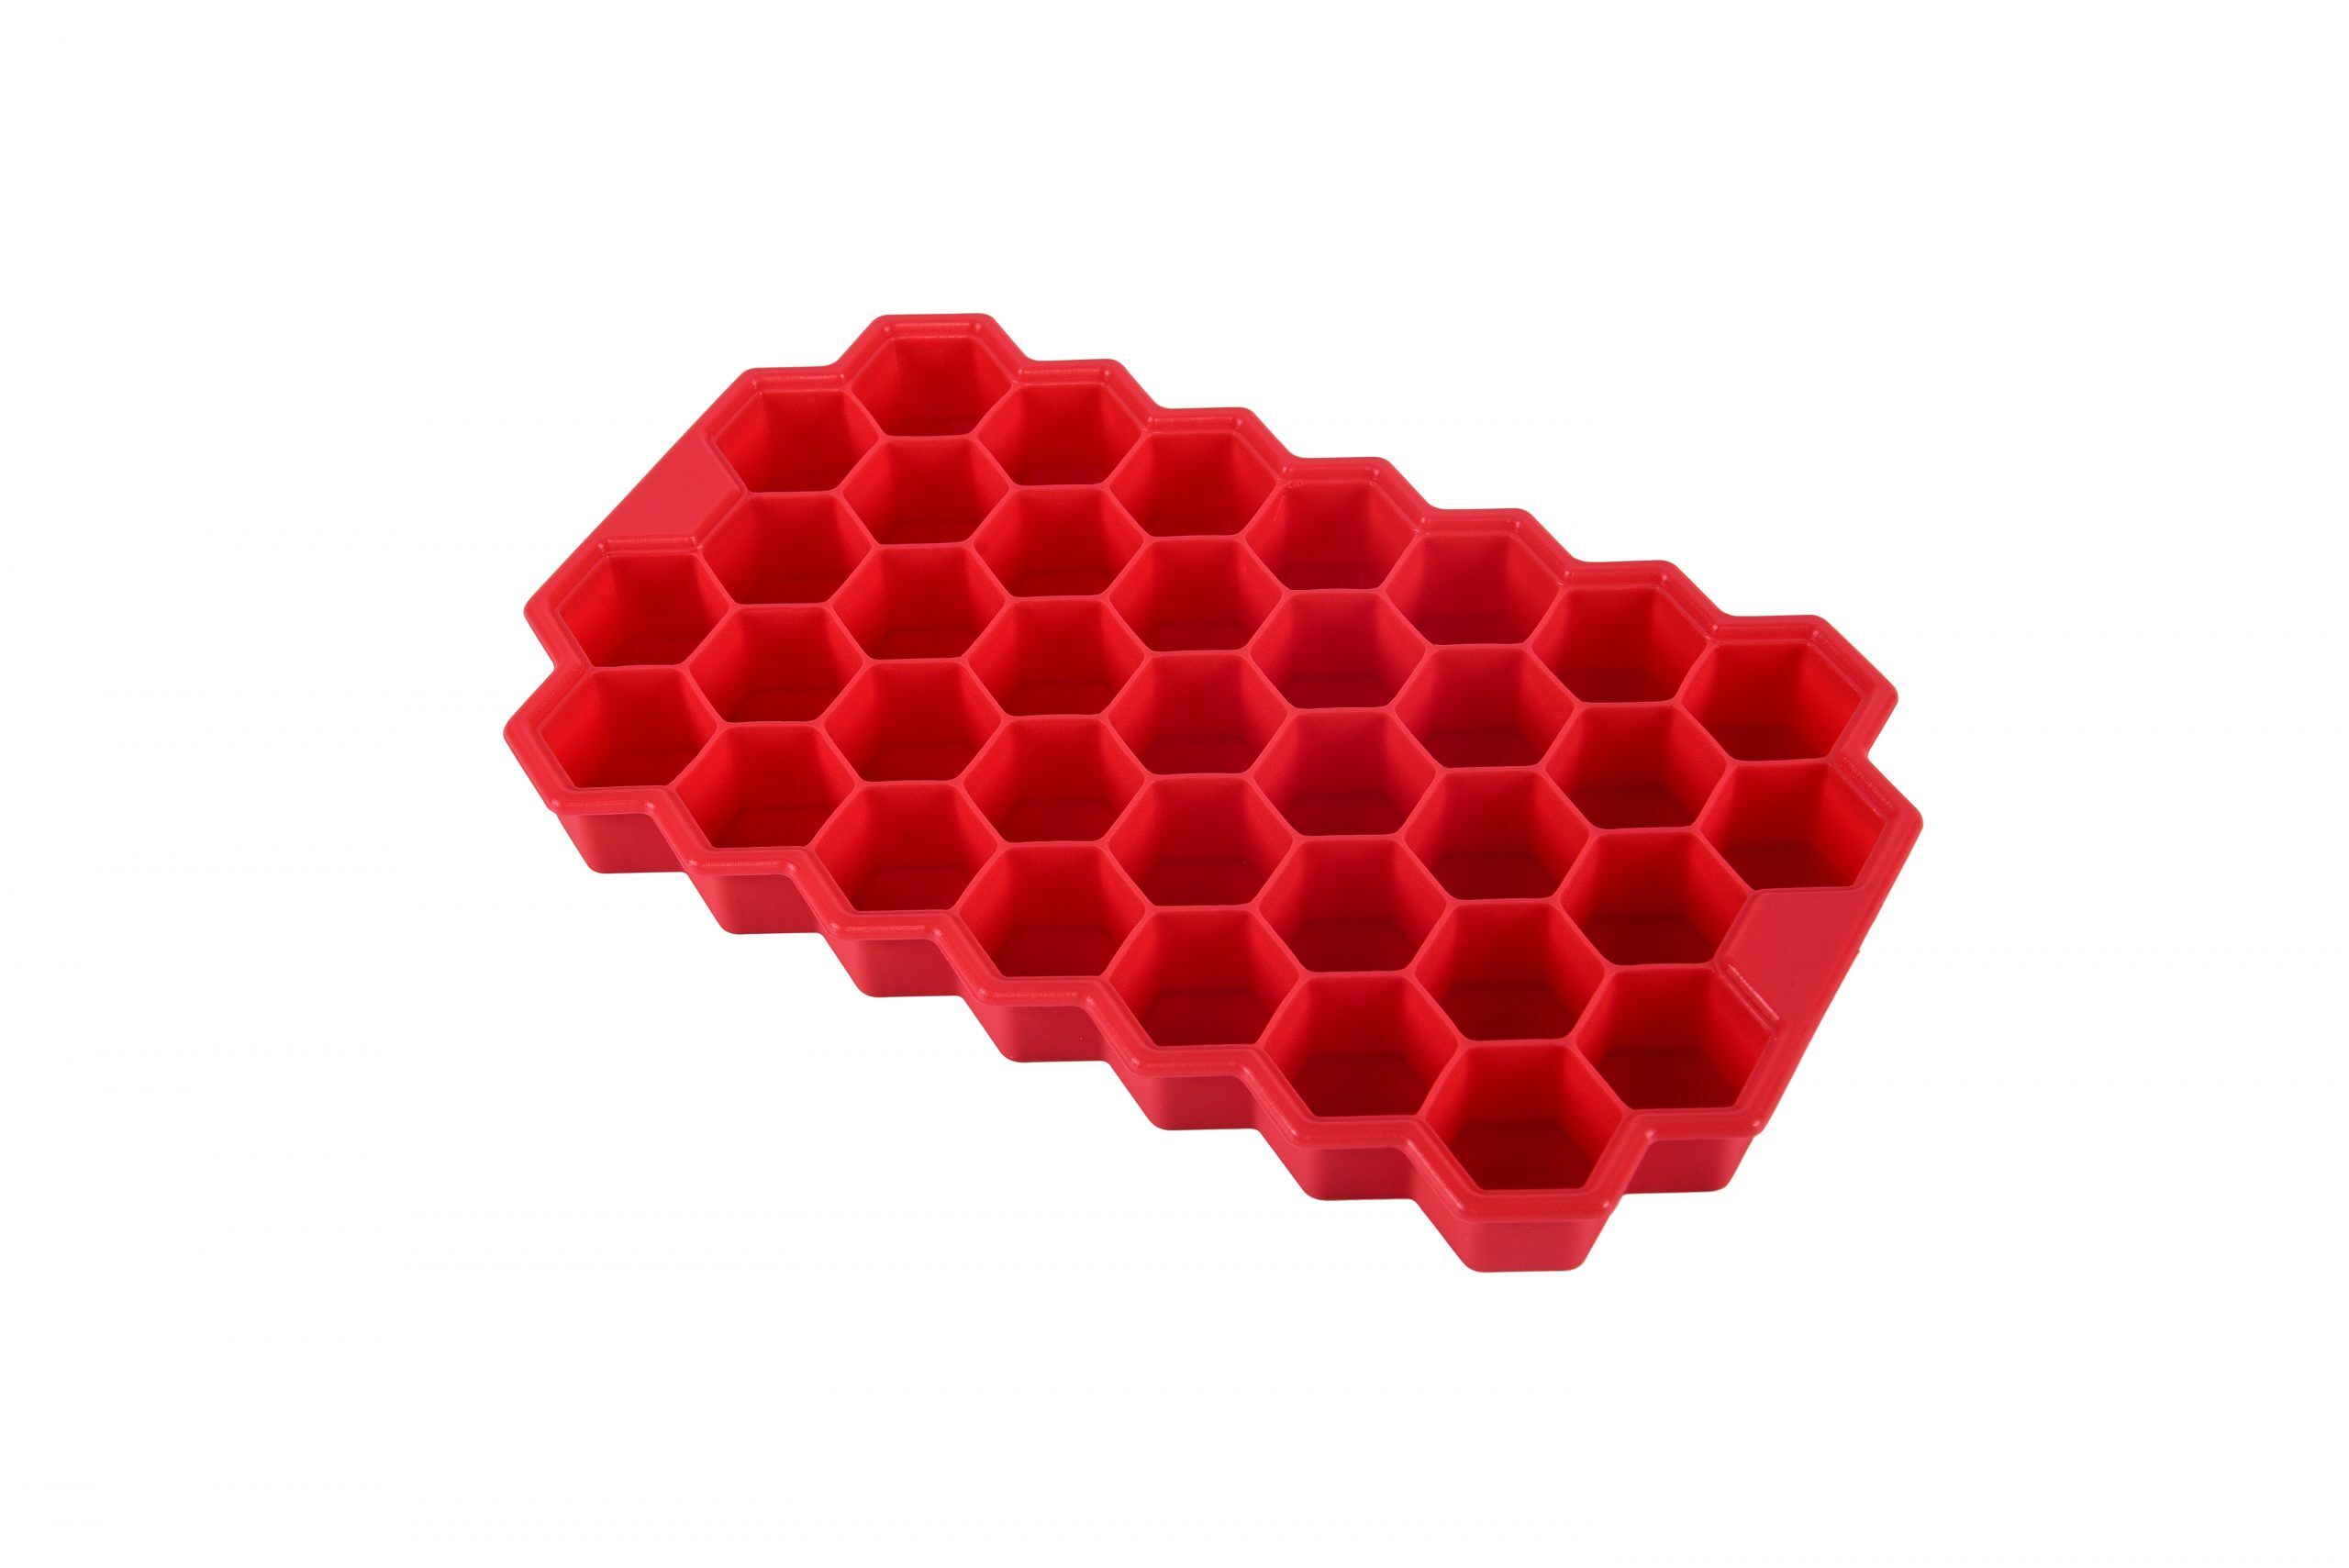 FRB Ice Mold Red